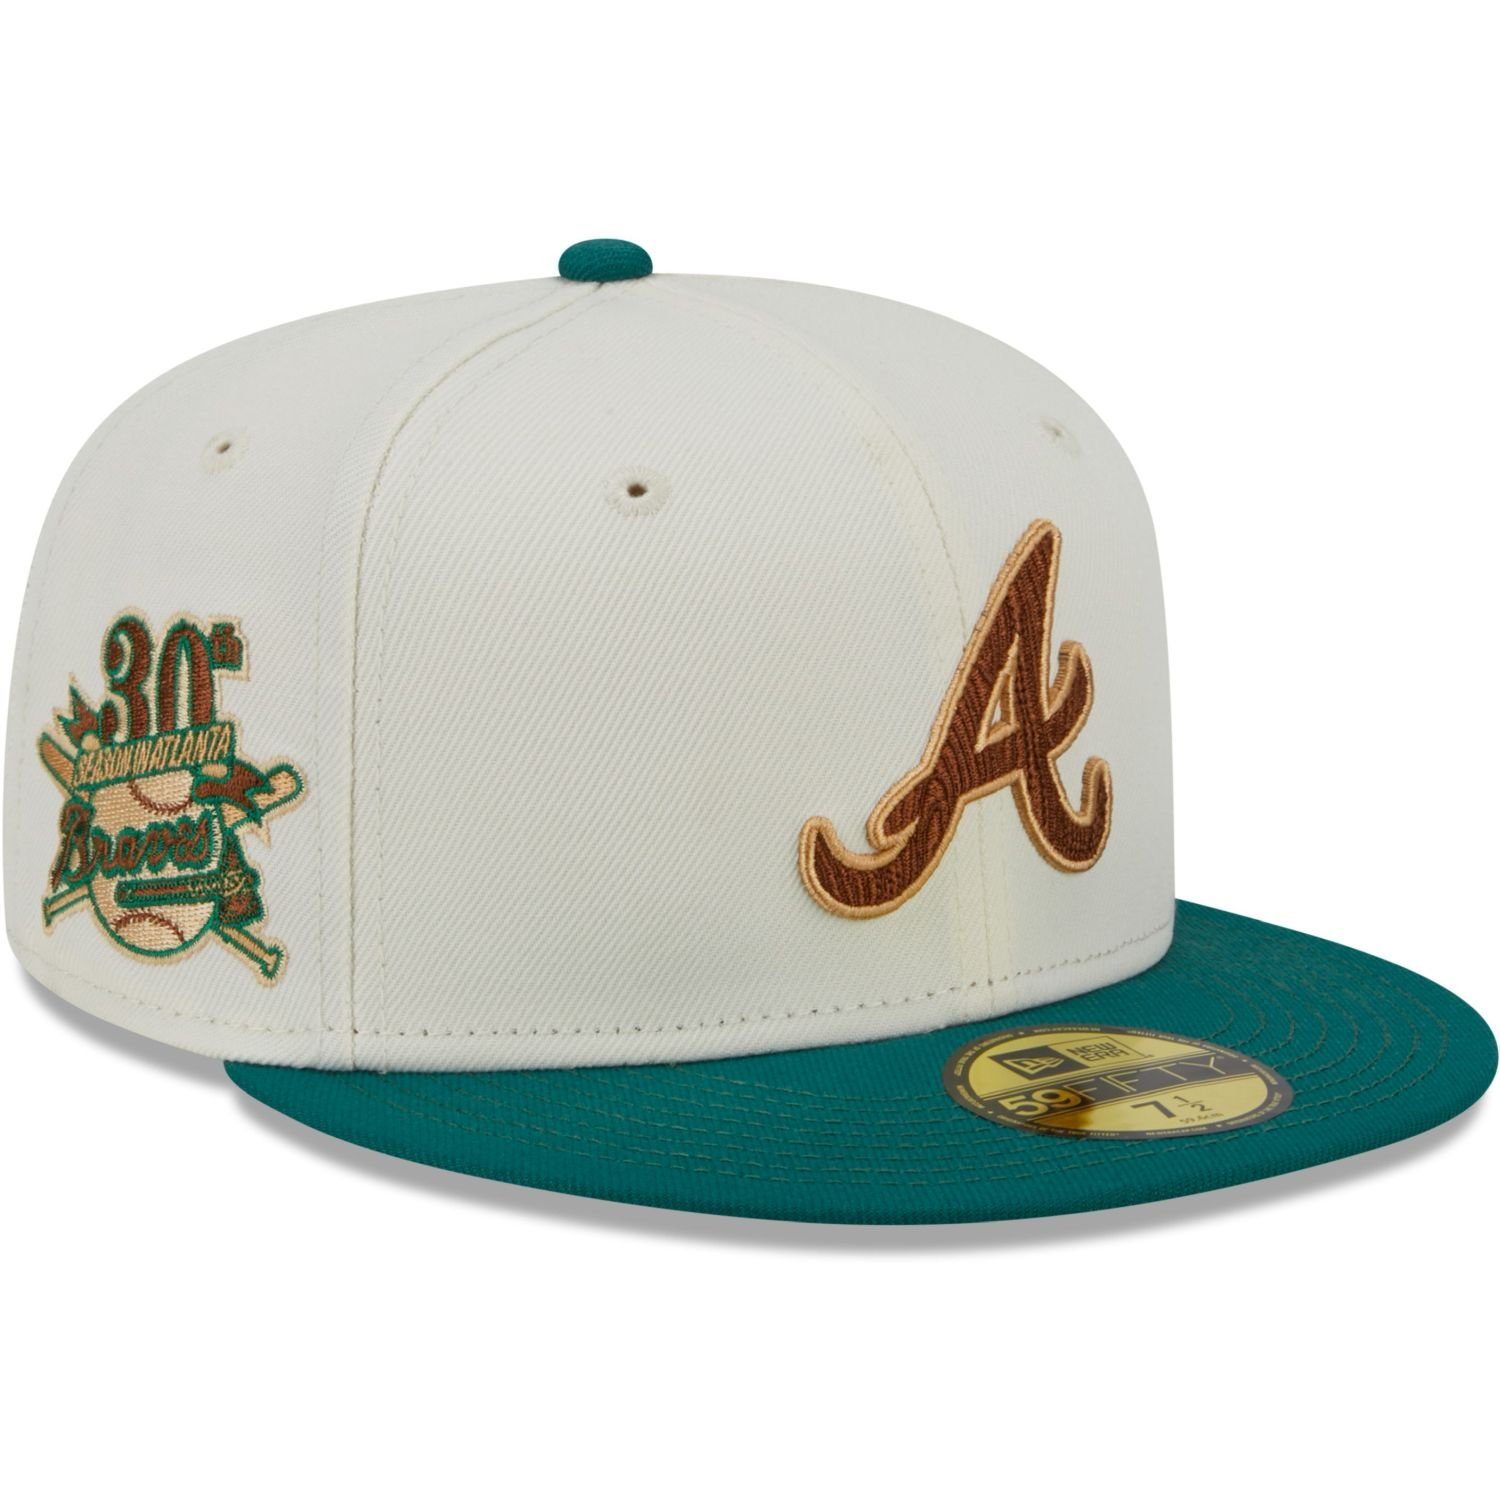 New Era Fitted Cap 59Fifty Braves CAMP Atlanta